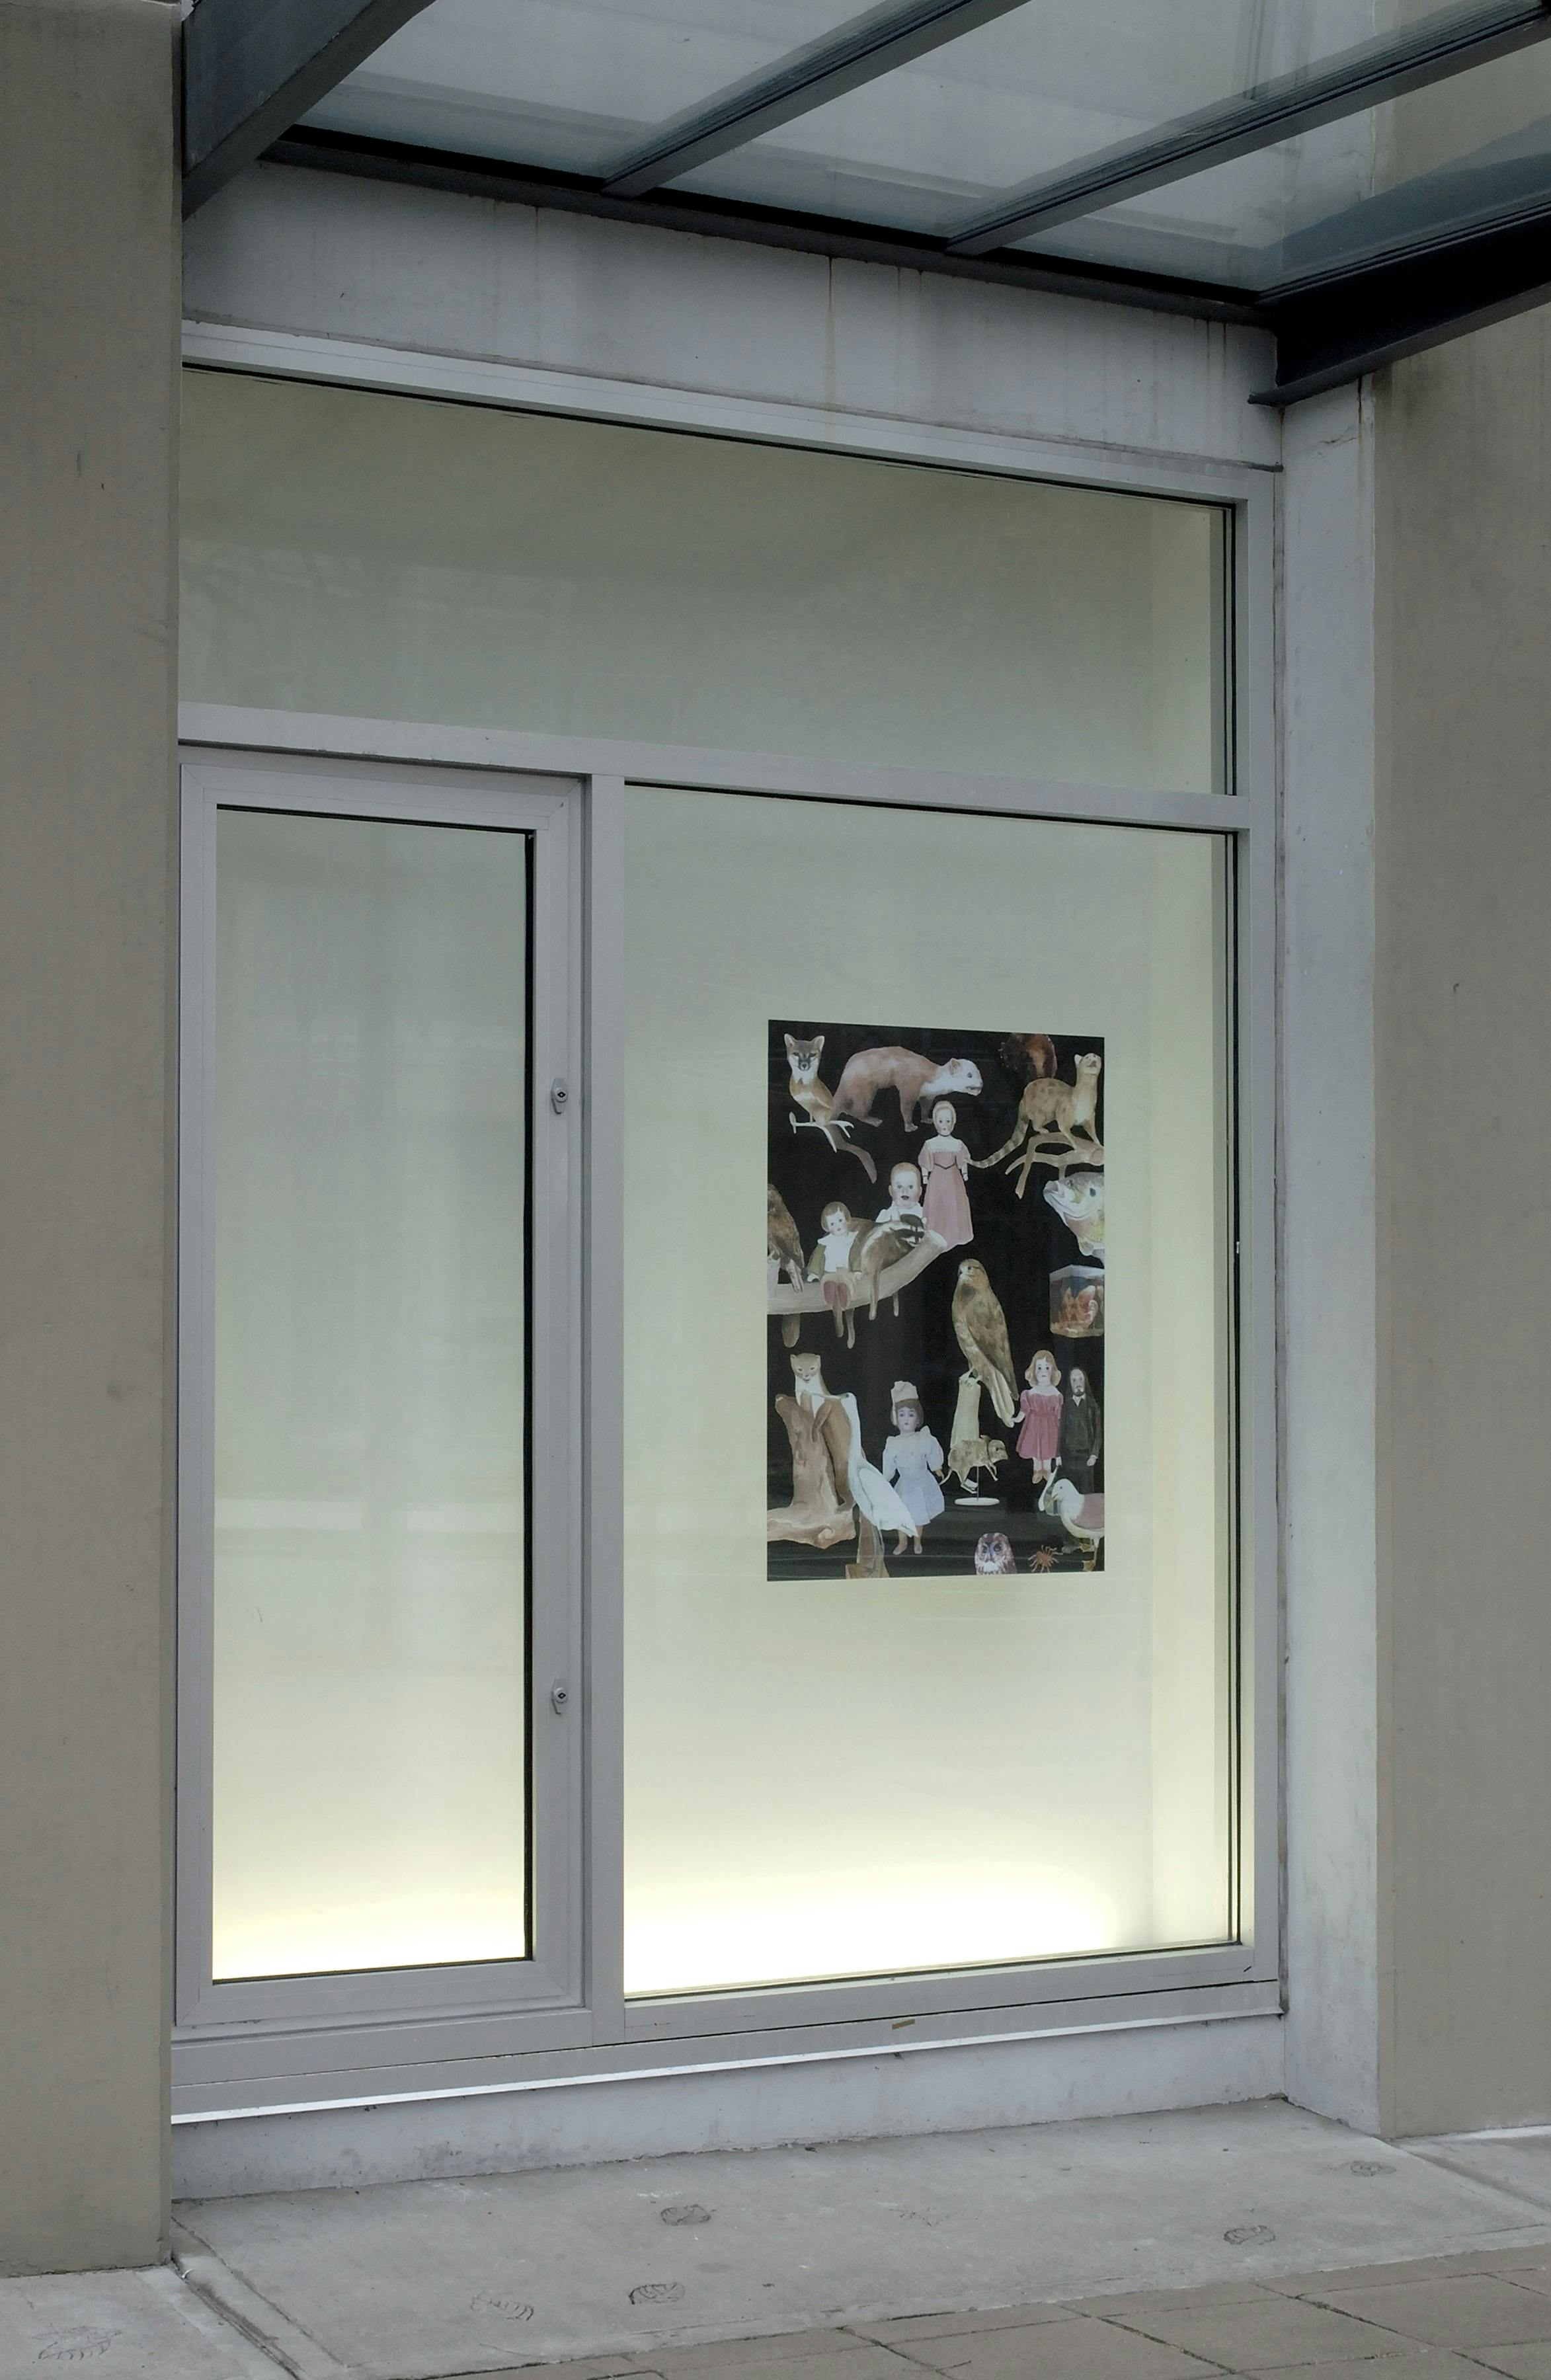 An install image of a poster created by Allison Hrabluik on CAG’s window. The poster shows colourful illustration of children, women, and animals on a pitch black background. 